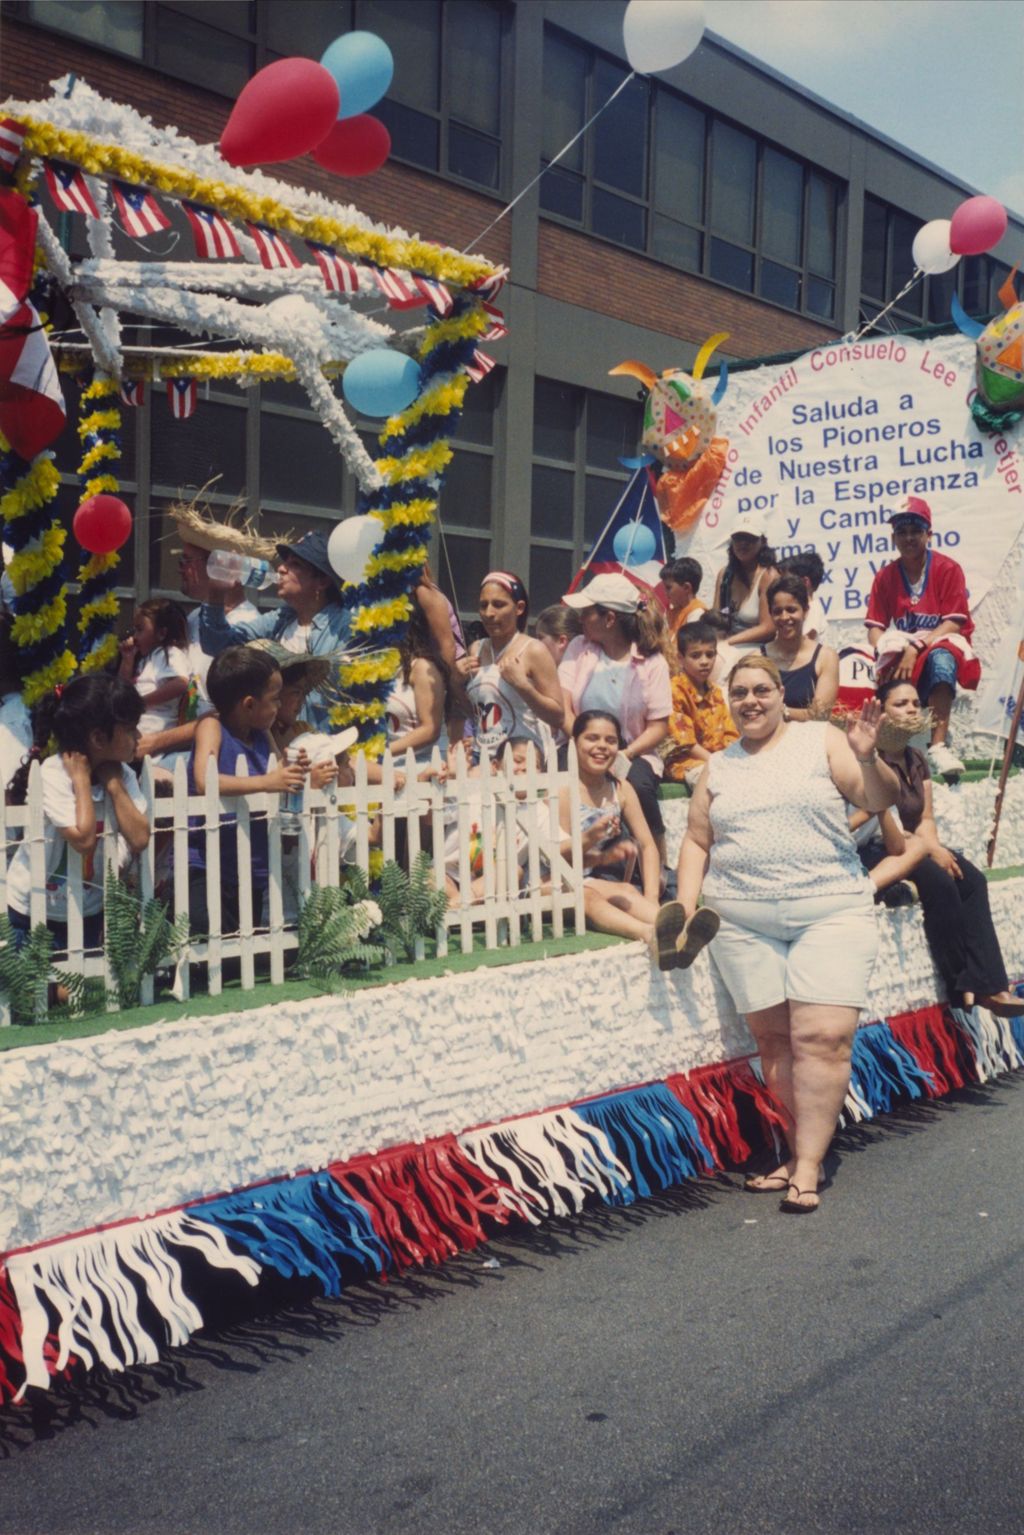 Miniature of People's Parade Float